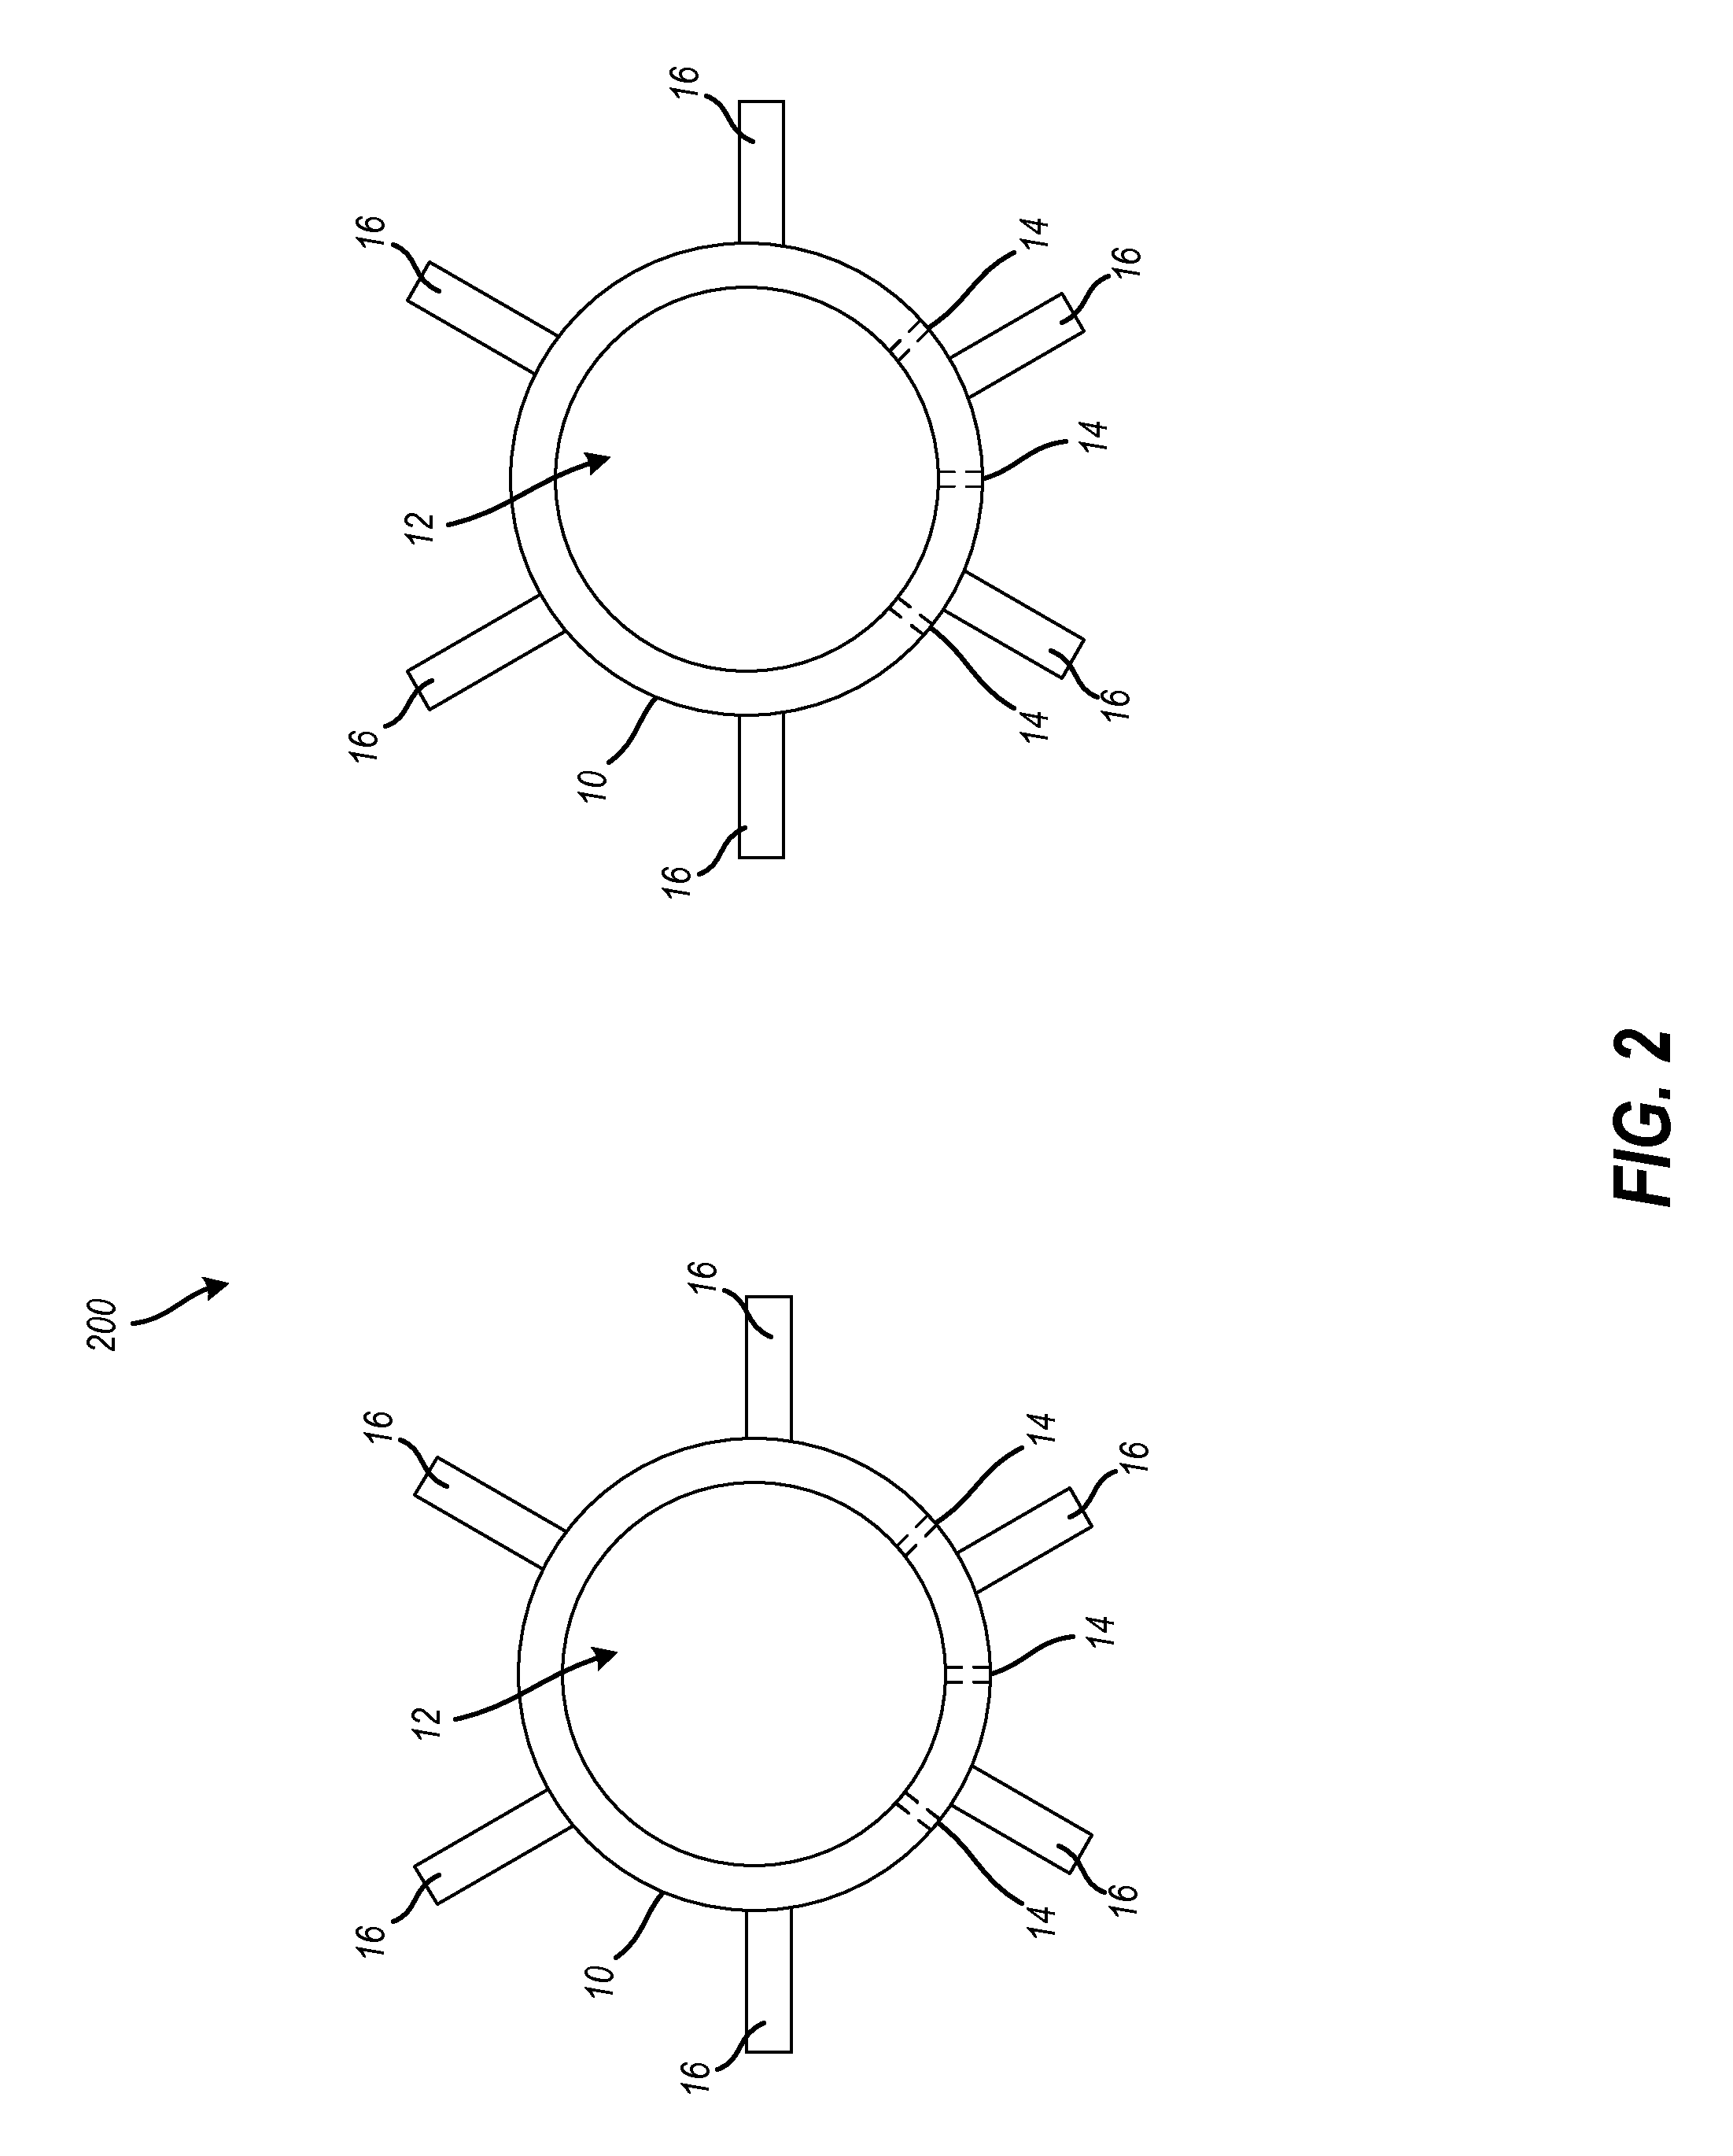 Heating and fluidization system for air fluidized sand beds